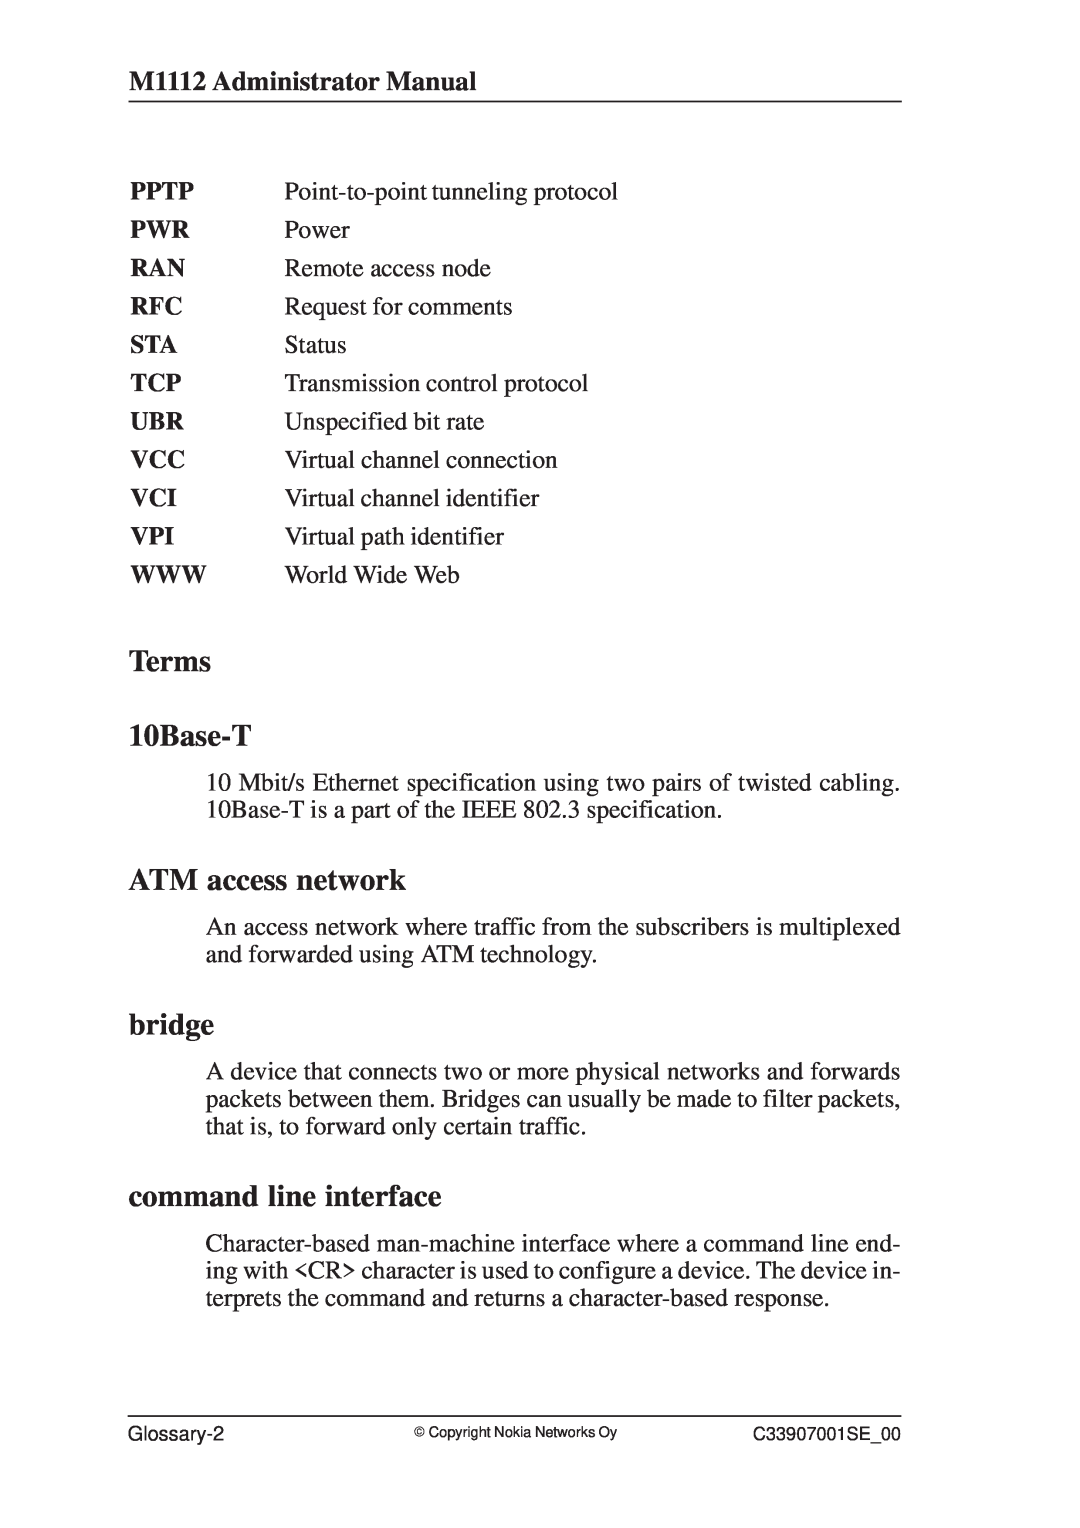 Nokia manual Terms 10Base-T, ATM access network, bridge, command line interface, M1112 Administrator Manual 